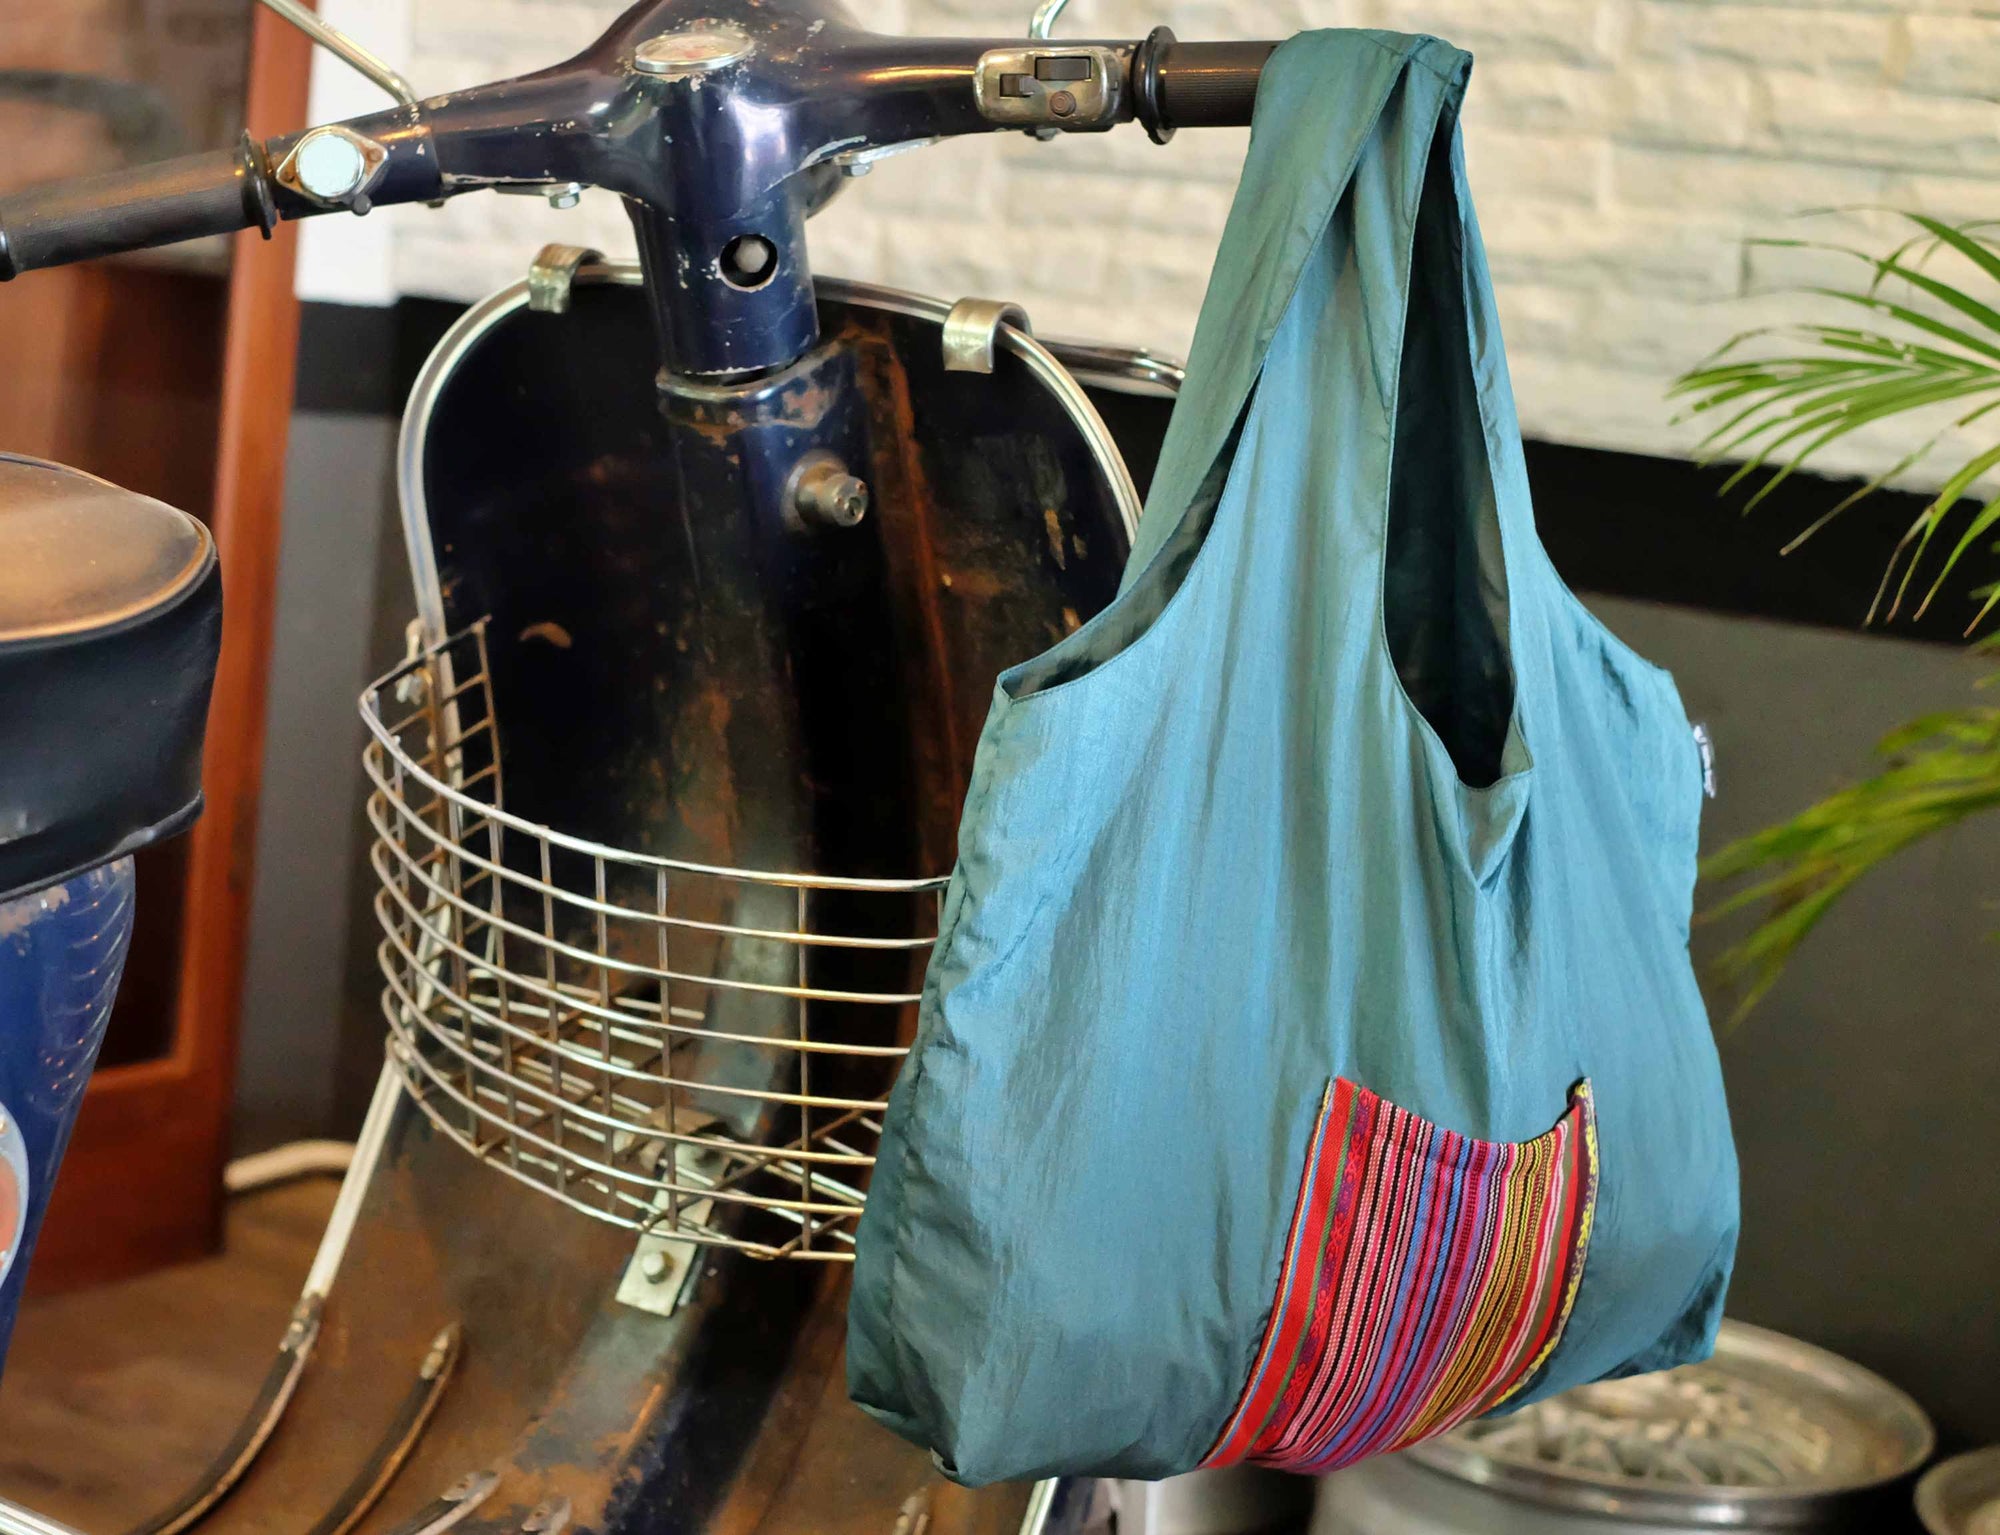 12 TIPS to Remember Your Reusable Bag